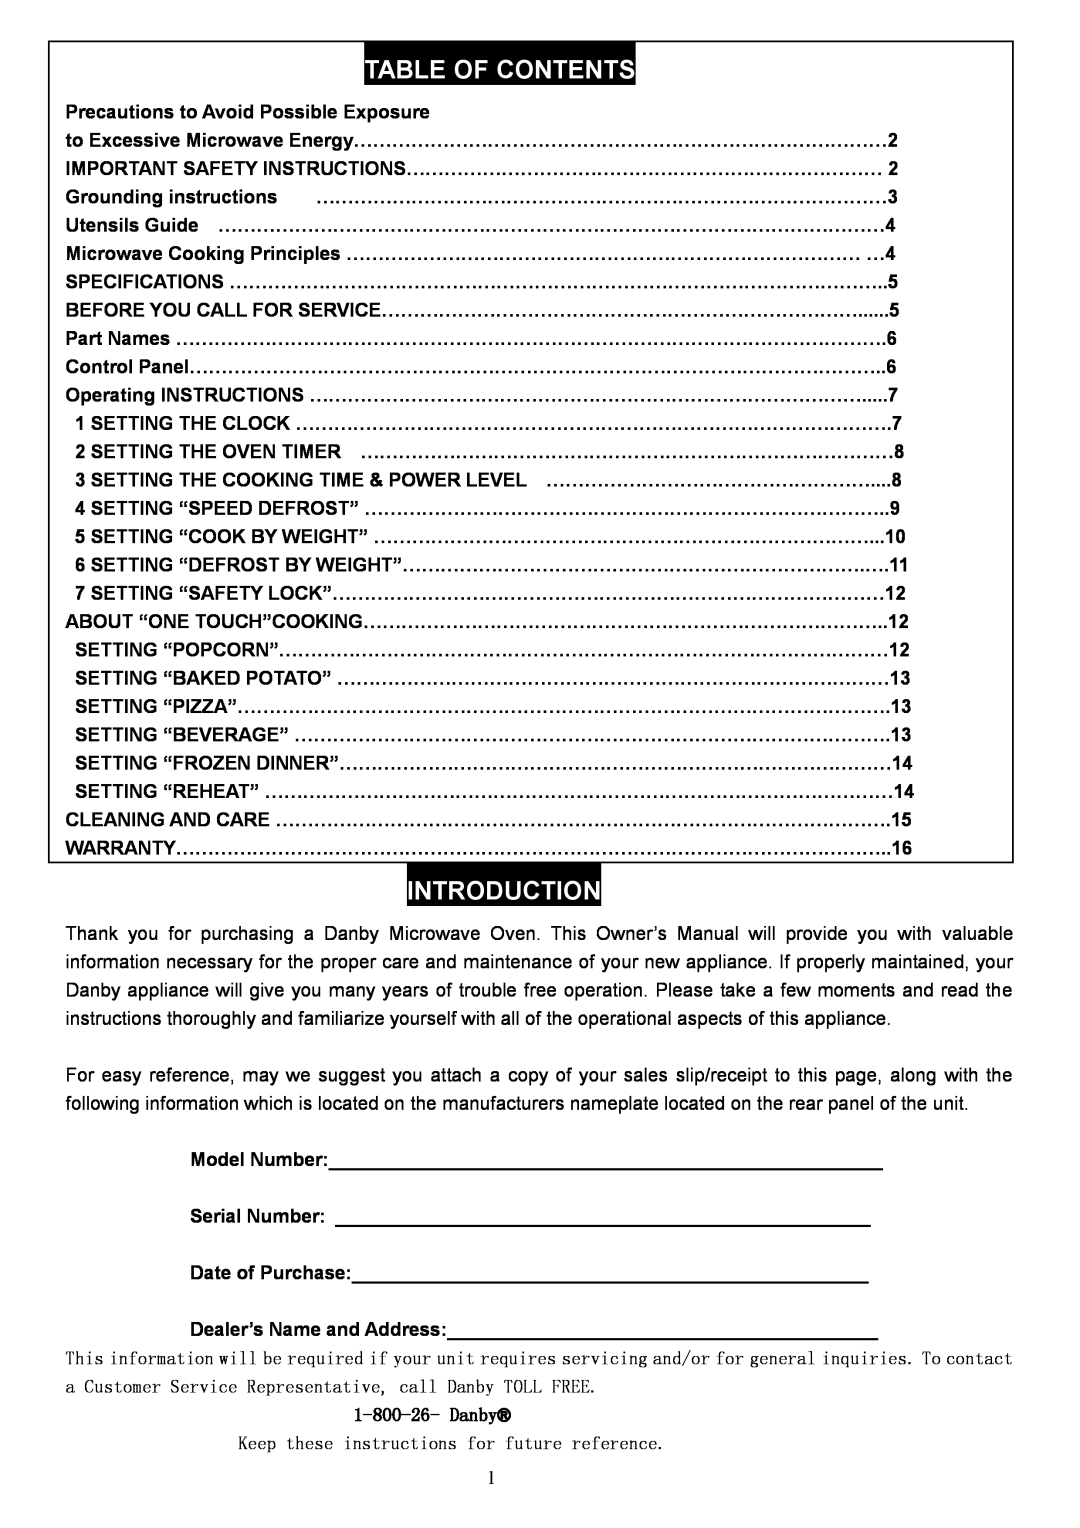 Danby DMW1148SS owner manual Table Of Contents, Introduction, Precautions to Avoid Possible Exposure 